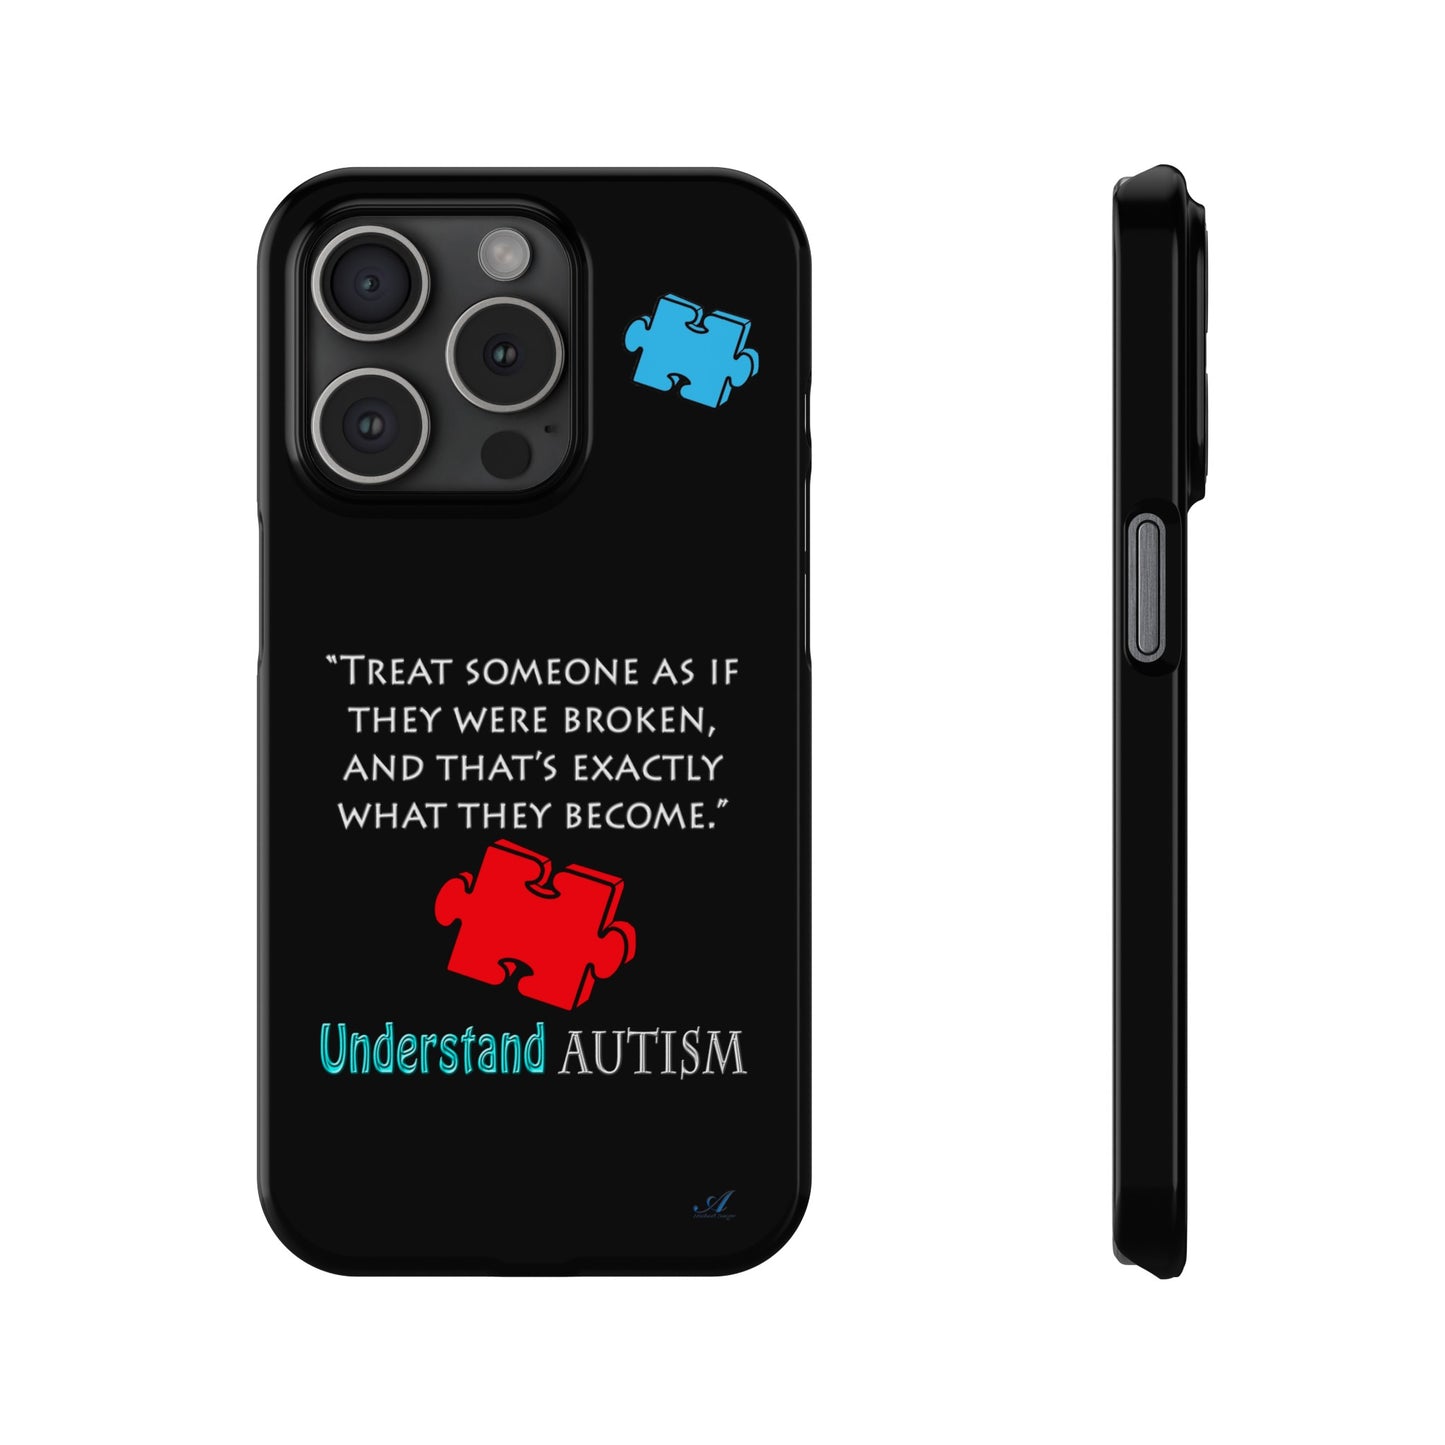 Understanding Autism Phone Case for iPhone 11, 12, 13, 14, and 15